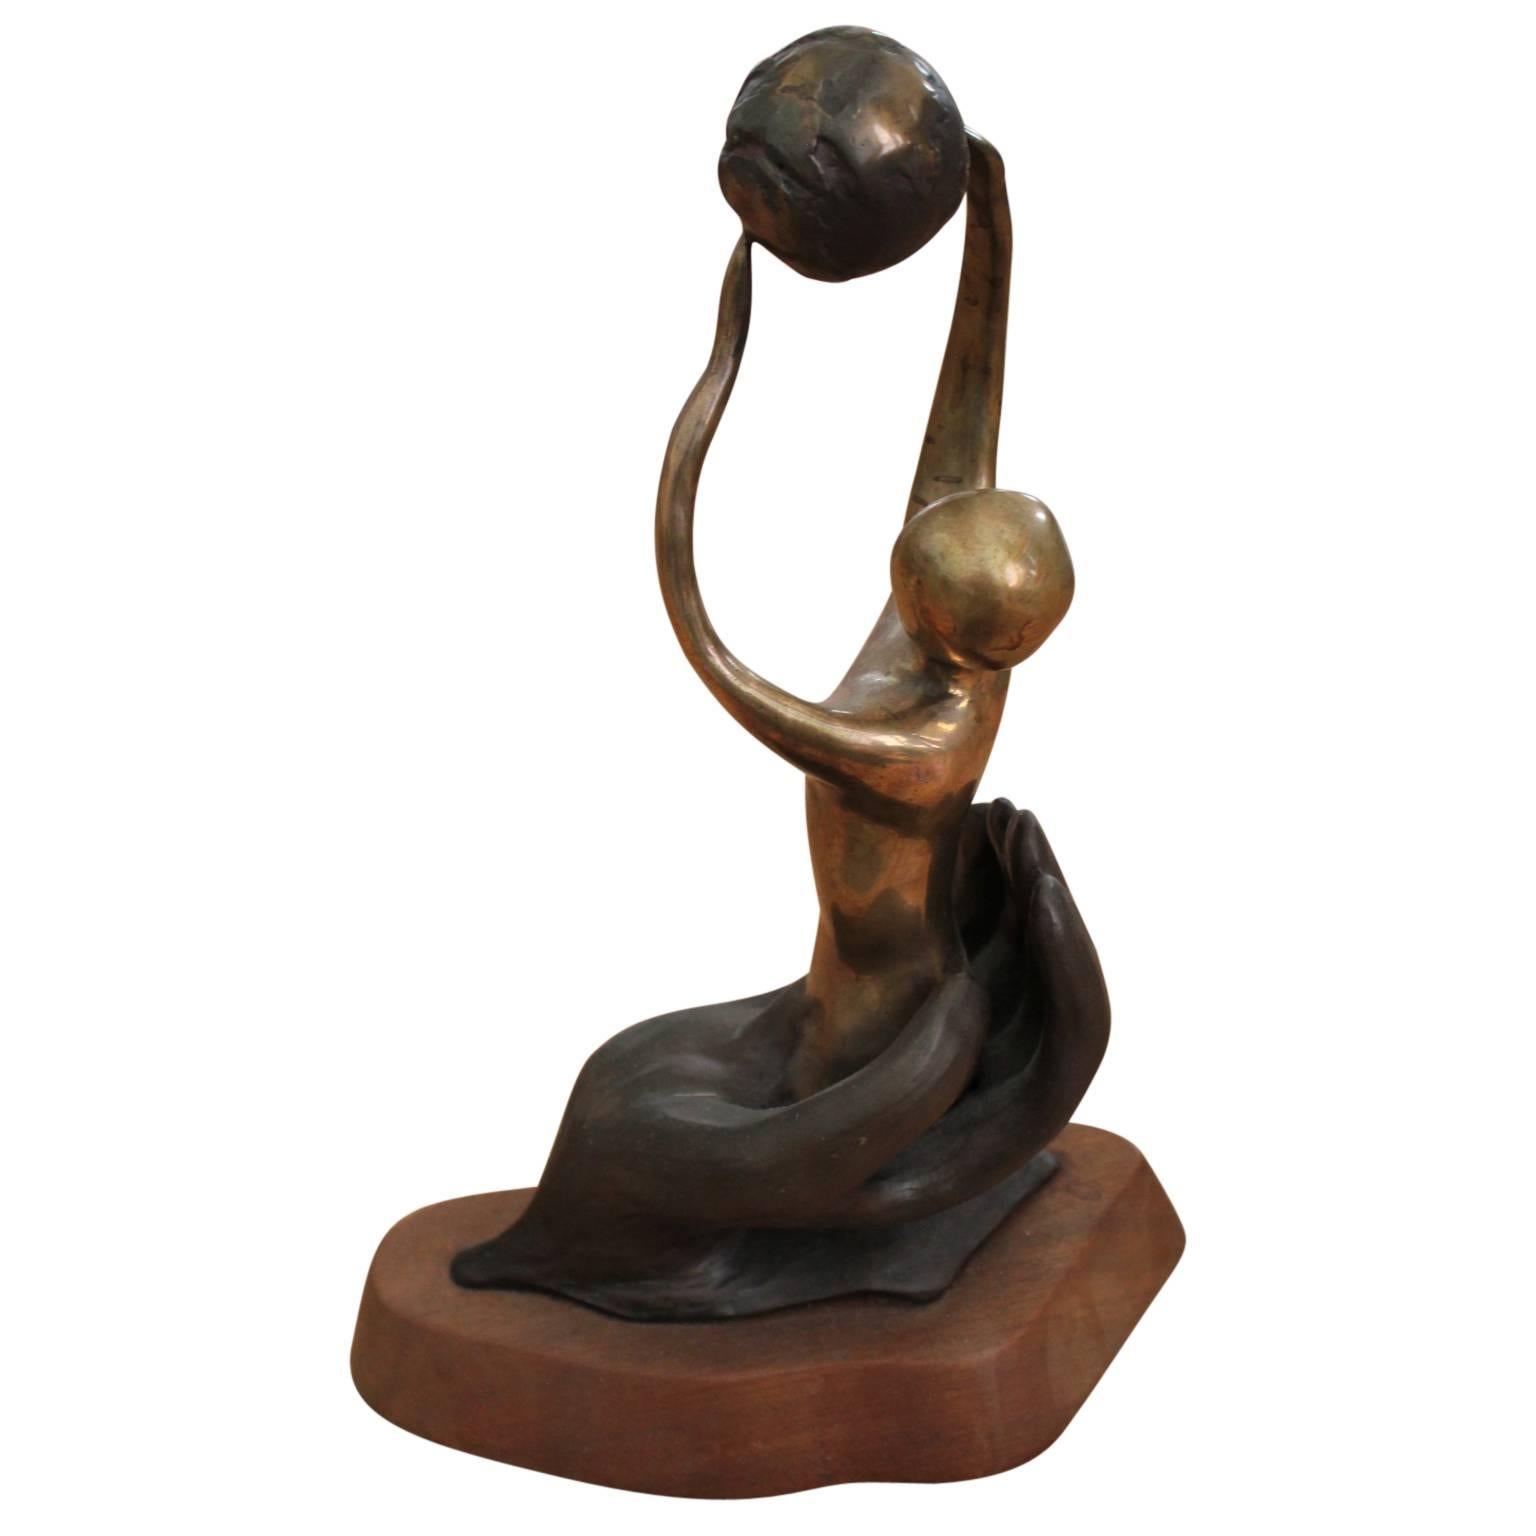 Abstract figurative sculpture of a women holding a globe above her head and is sitting in the palm of a hand. The bronze piece is on top of a wood pedestal. It was given as a Houston Service award in 1986. The artist signed, titled and dated the